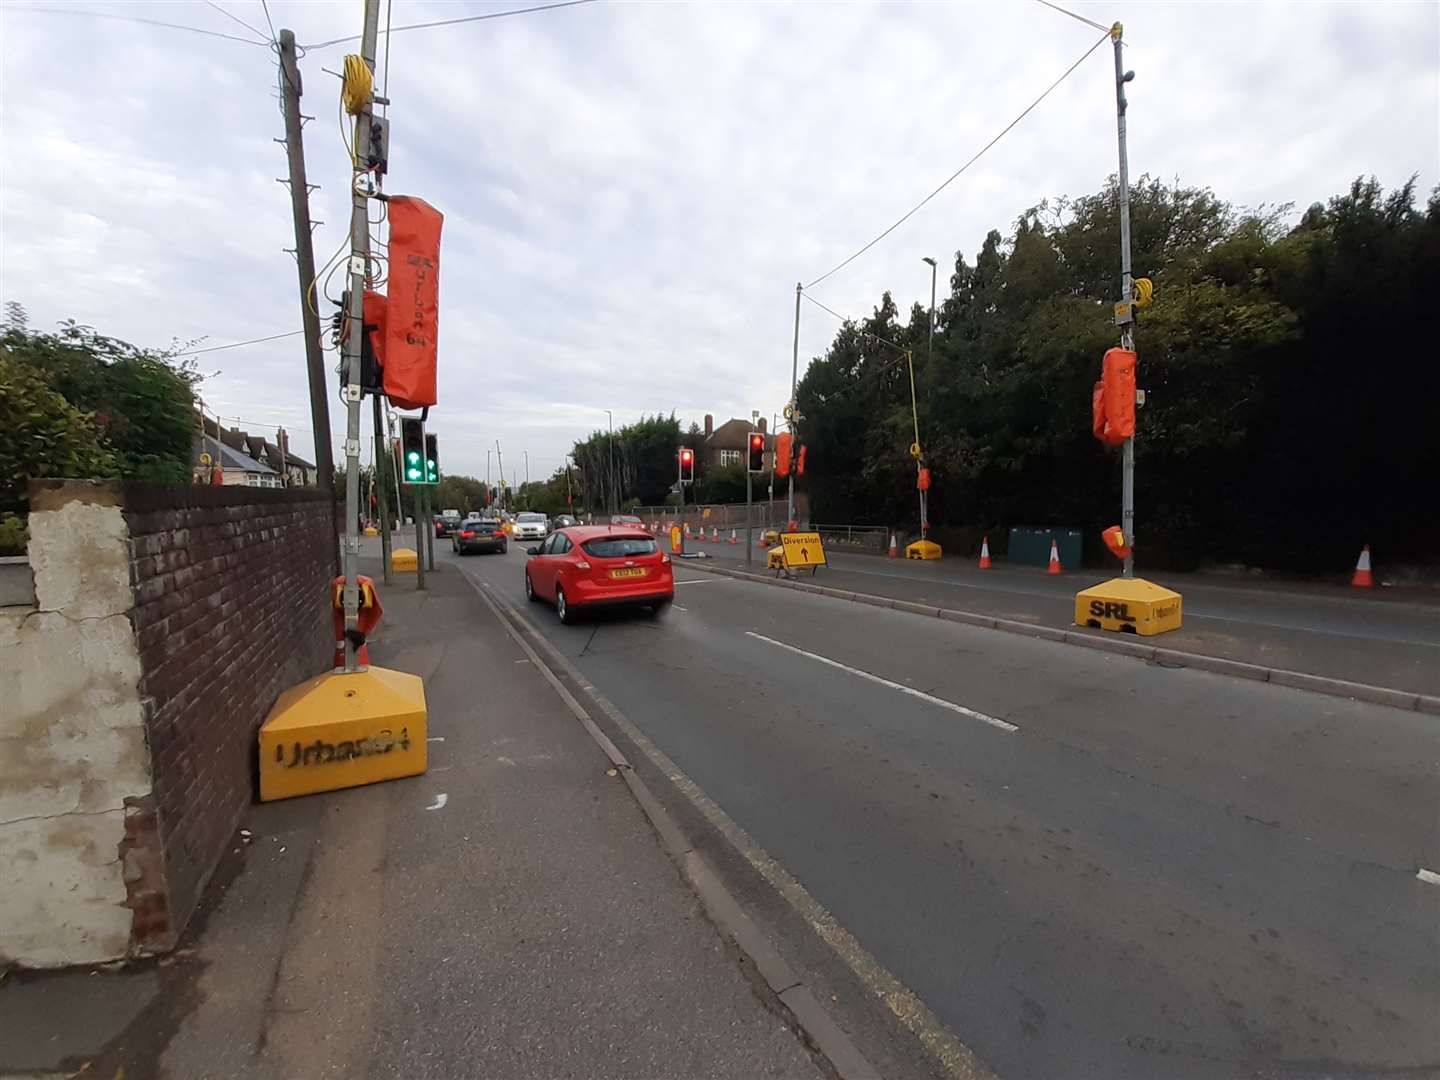 Temporary traffic lights are being installed